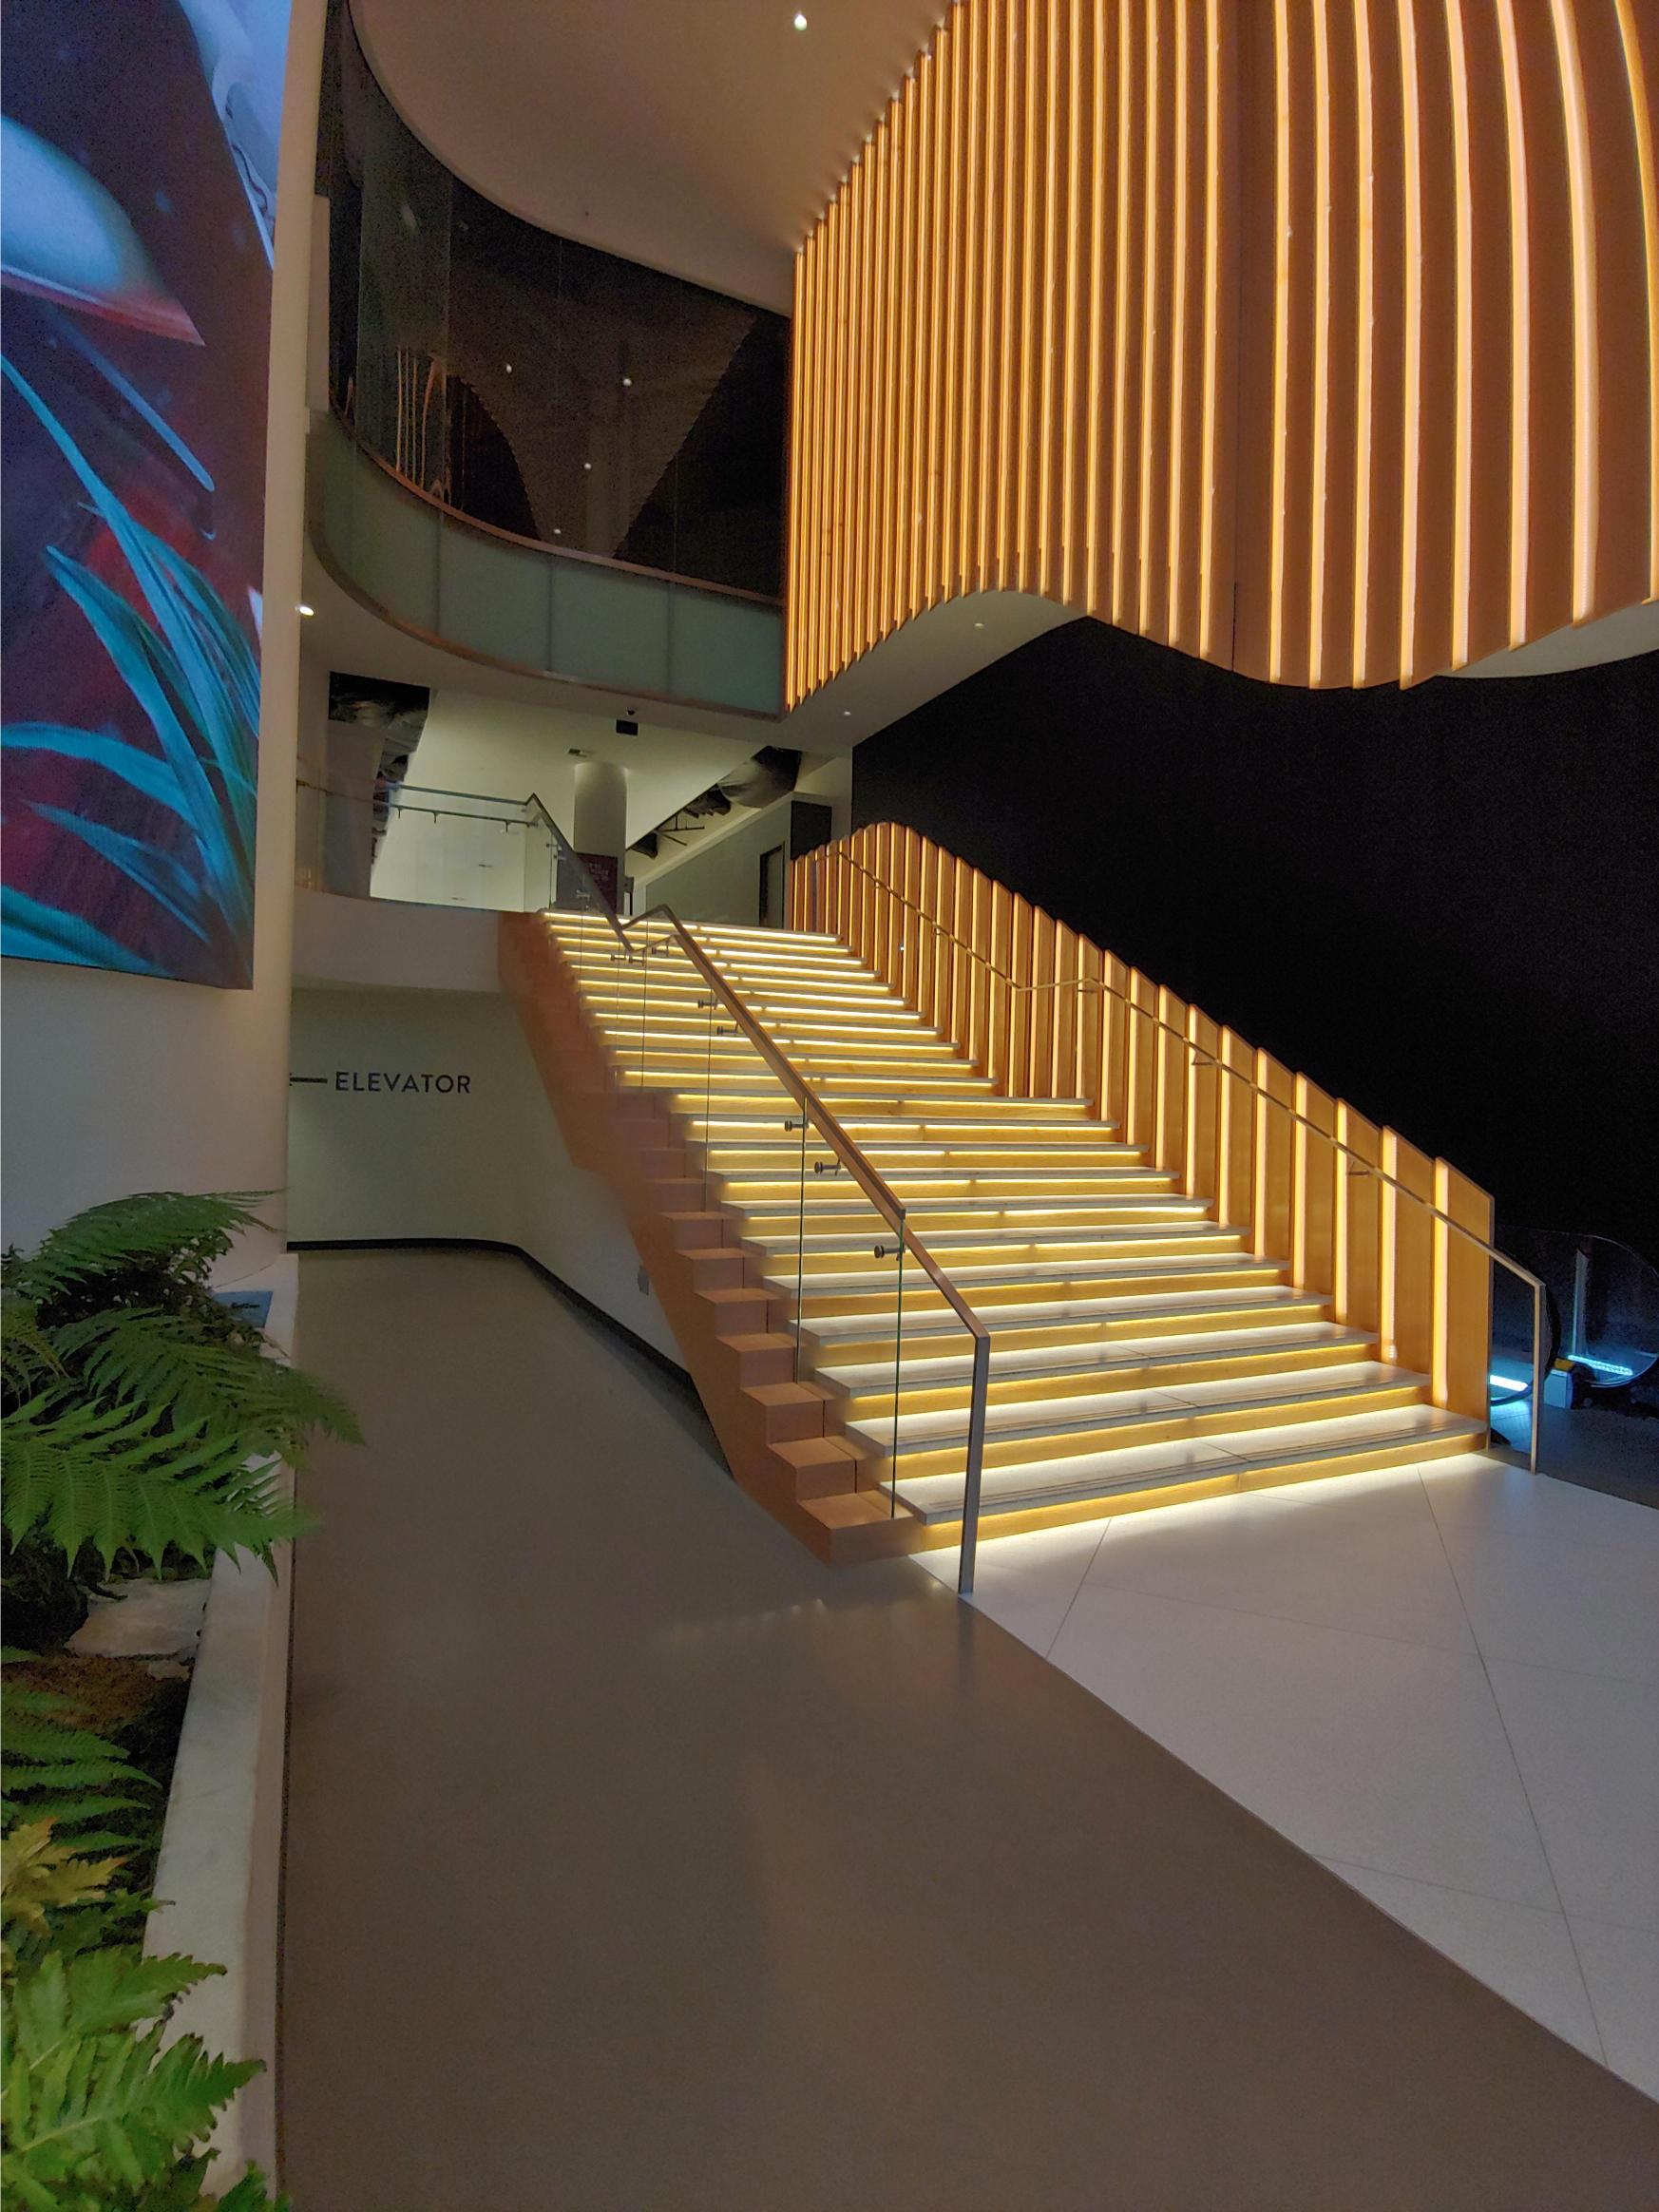 Pacific Place in Seattle, WA - Synergi railings at feature stair